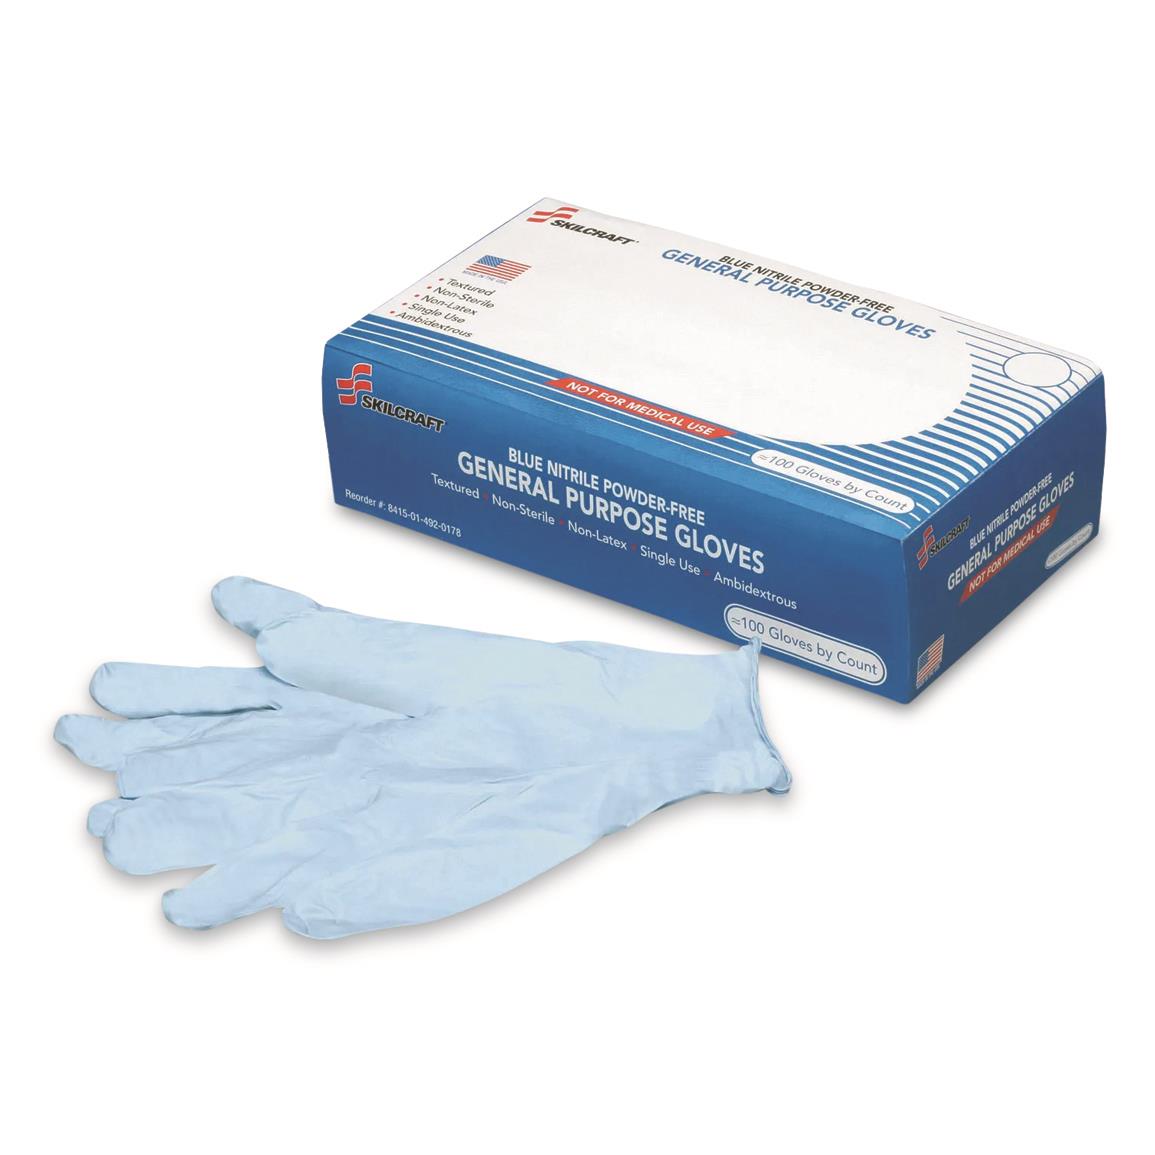 U.S. Military Surplus Disposable Nitrile Gloves, 50 Pairs, New